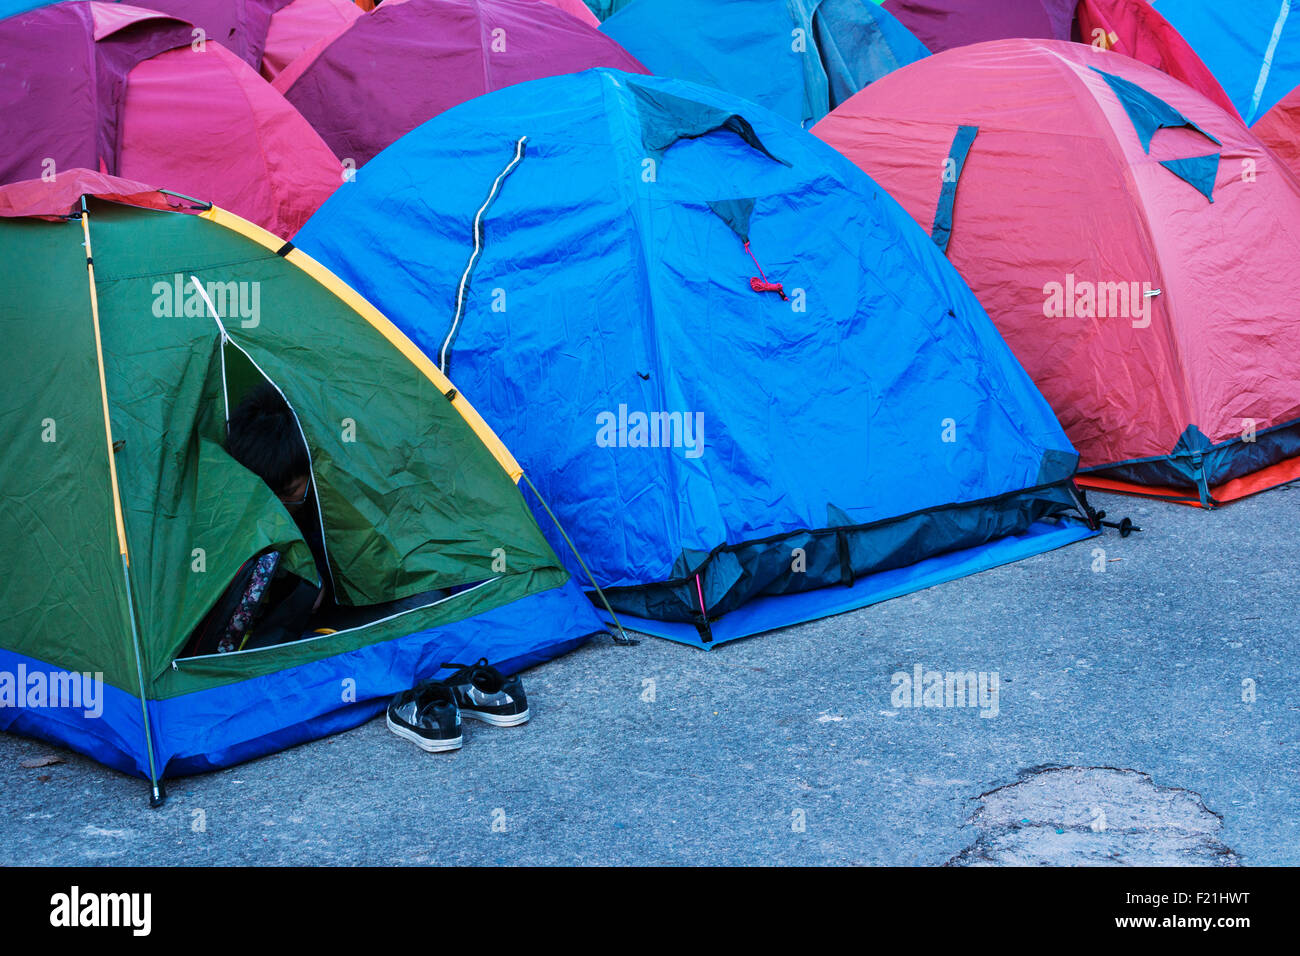 Camping tents at Yellow Mountain, Huang Shan, popular tourist destination, Anhui province, China, Asia Stock Photo